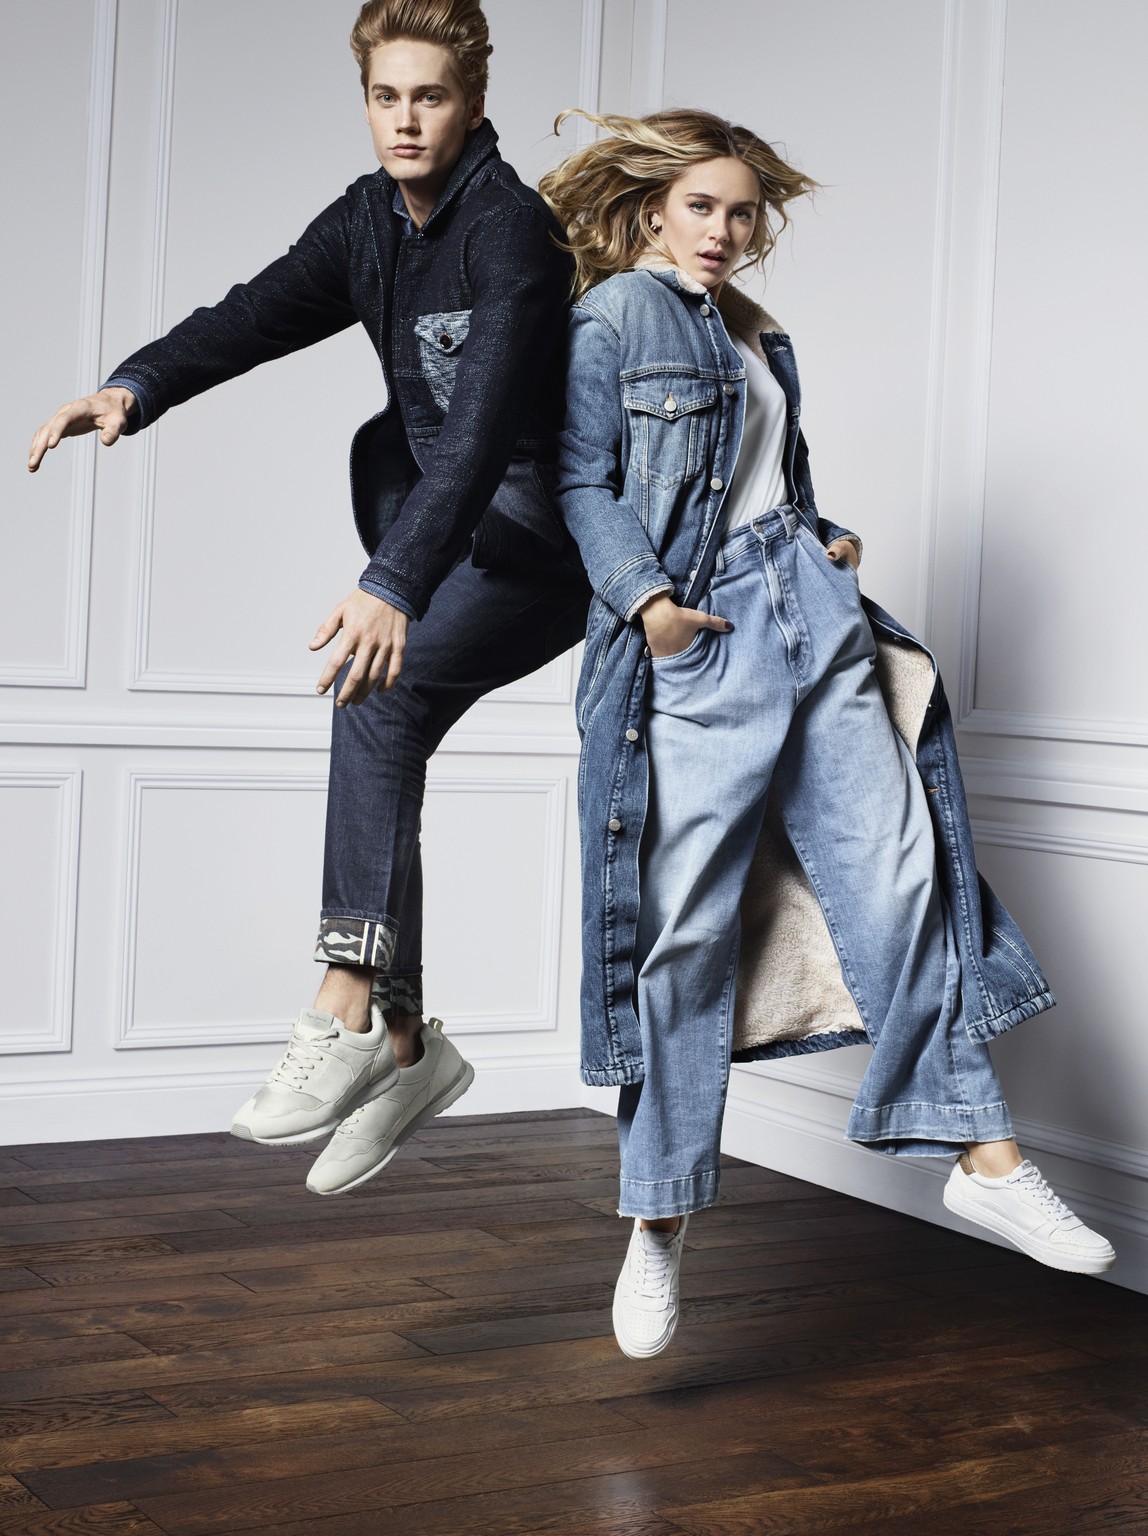 Pepe Jeans London campaign